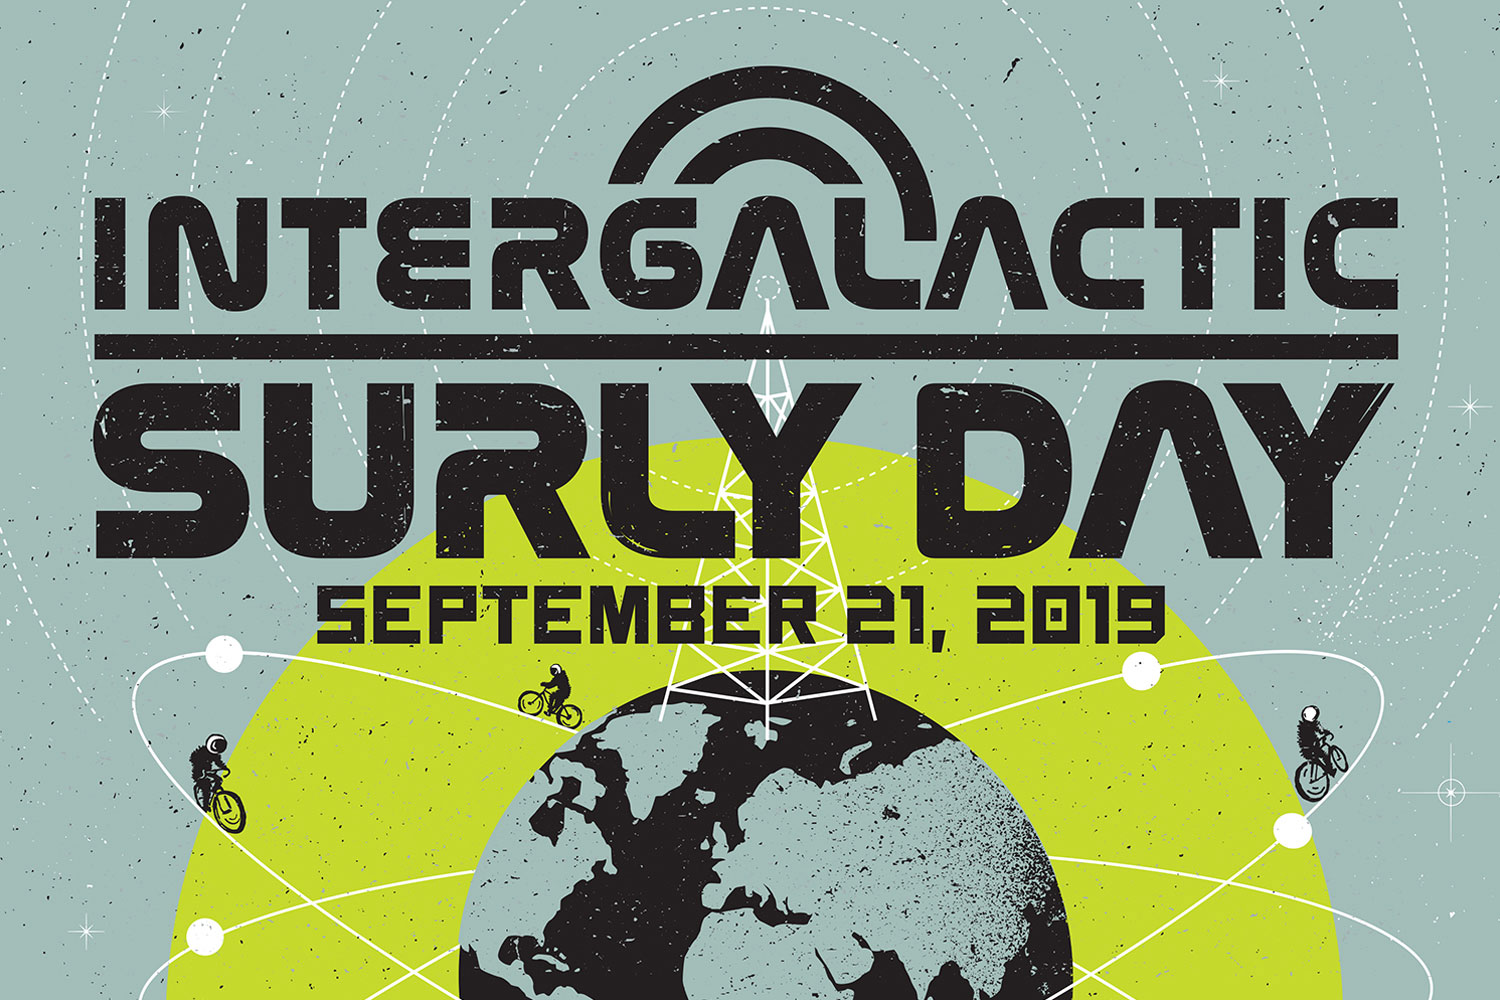 Intergalactic Surly Day